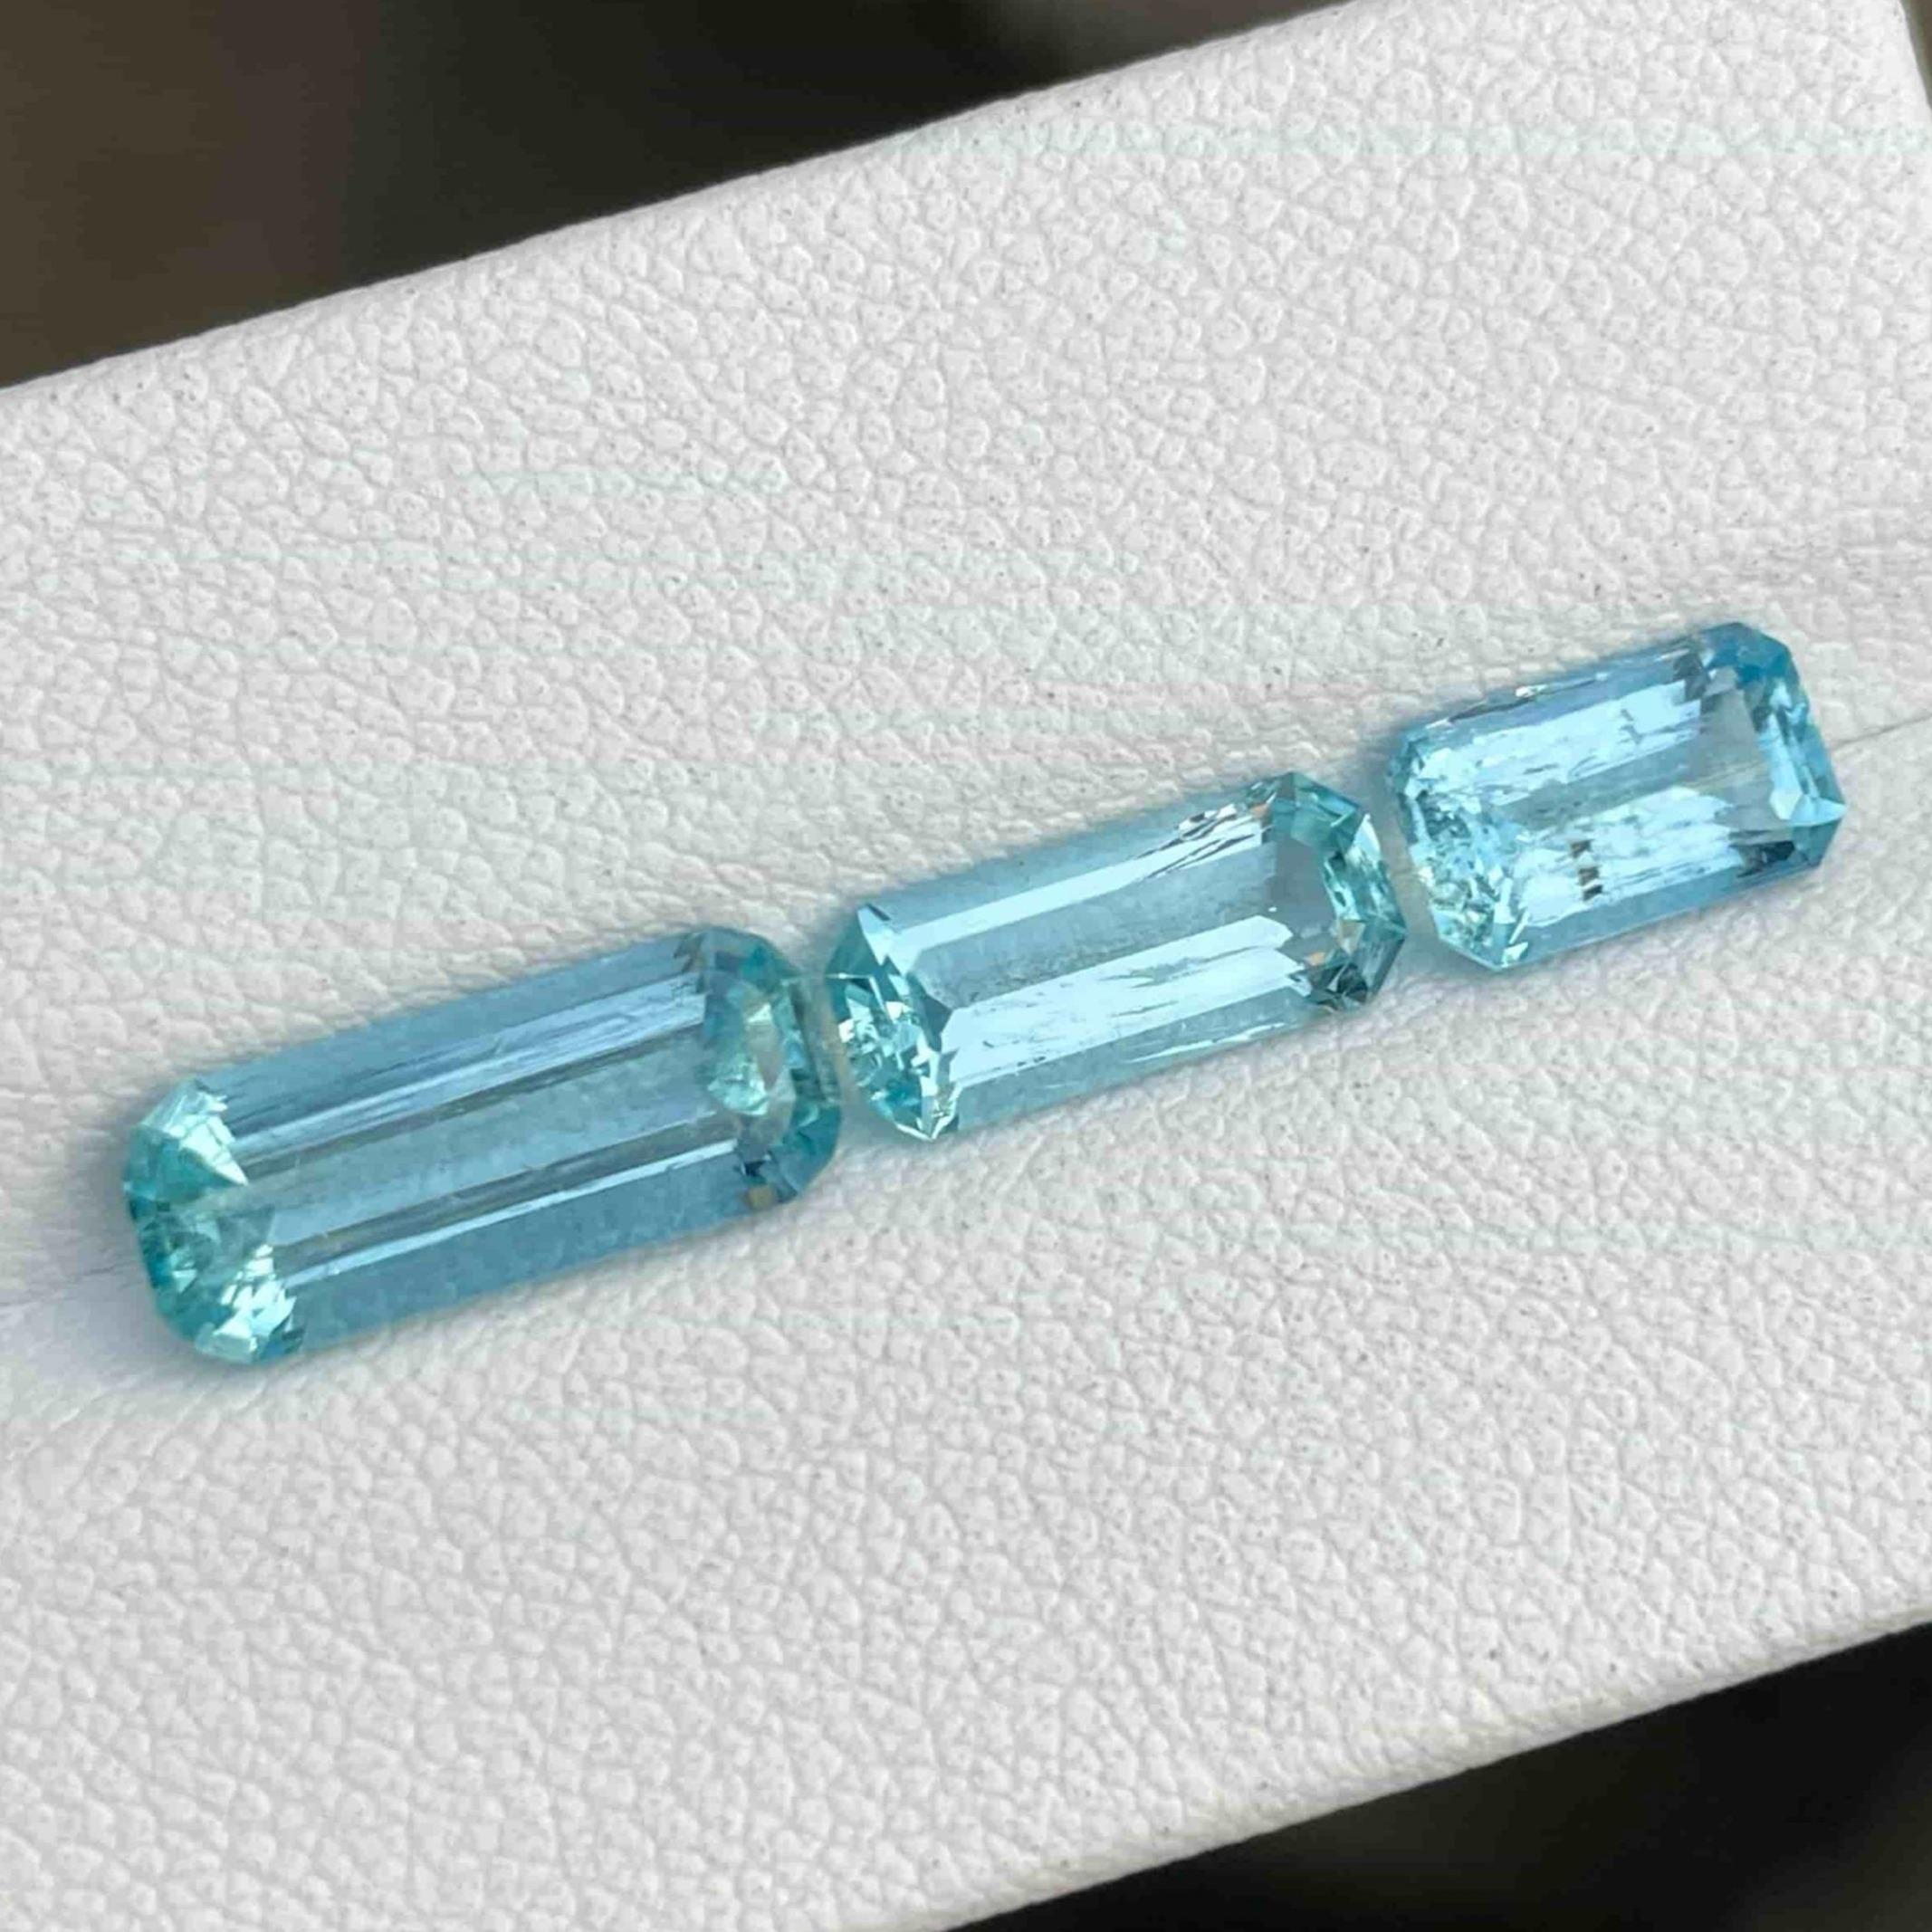 Gemstone Type Natural Intense Blue Aquamarine
Weight 4.95 carats
Individual Weight 2.10, 1.15, and 1.10 carats
Clarity Slightly Included (SI)
Origin Brazil
Treatment None





Indulge in the allure of nature's beauty with this extraordinary batch of